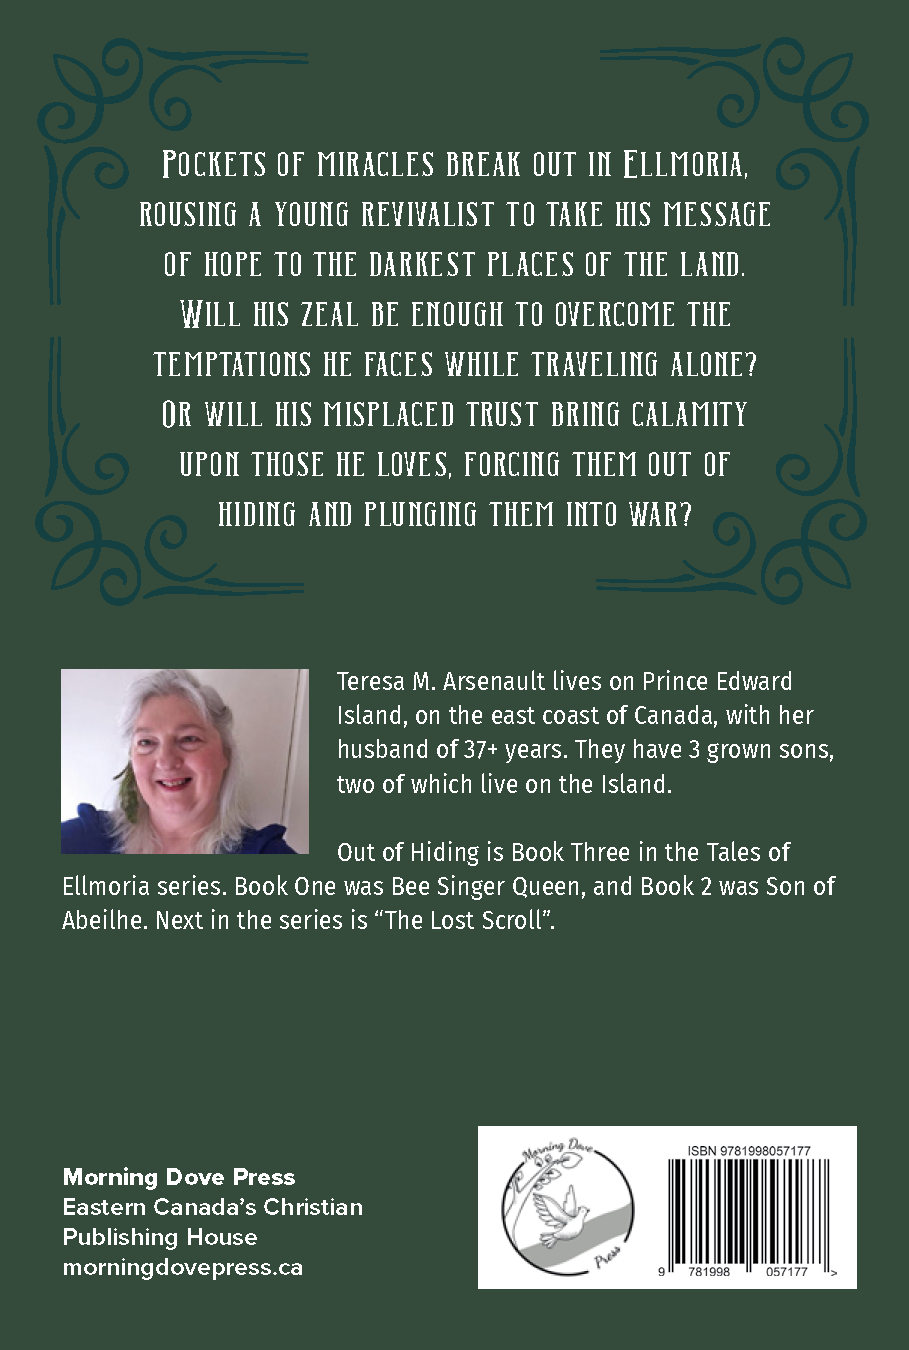 Tales of Ellmoria: Out of Hiding, by Teresa M. Arsenault